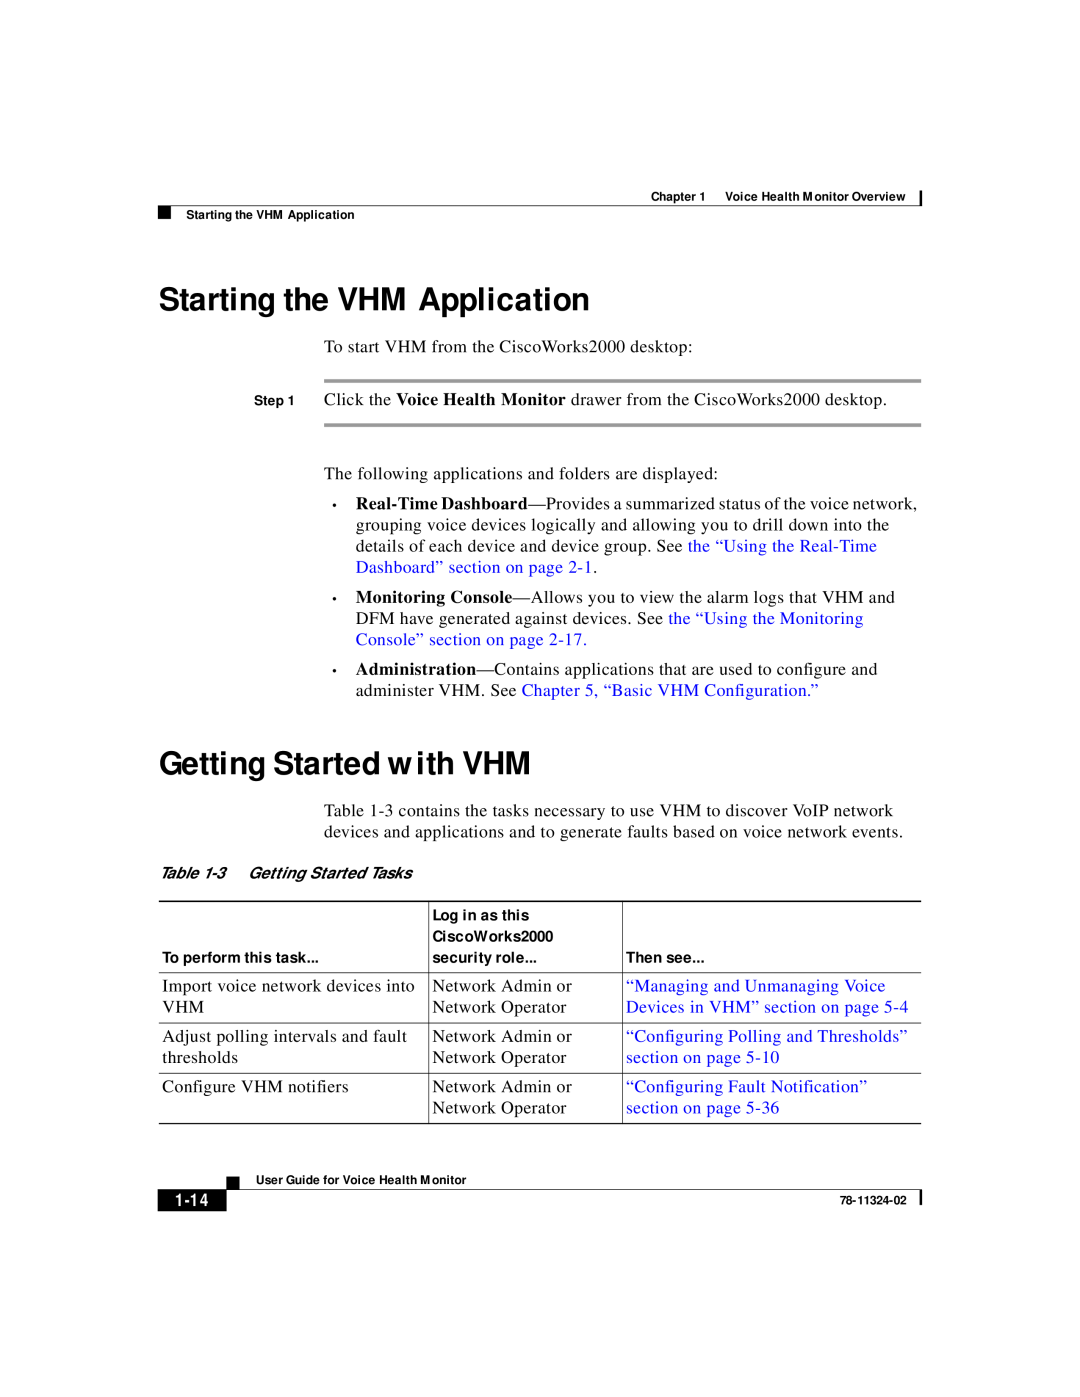 Cisco Systems 78-11324-02 Starting the VHM Application, Getting Started with VHM, Log in as this, CiscoWorks2000, Then see 